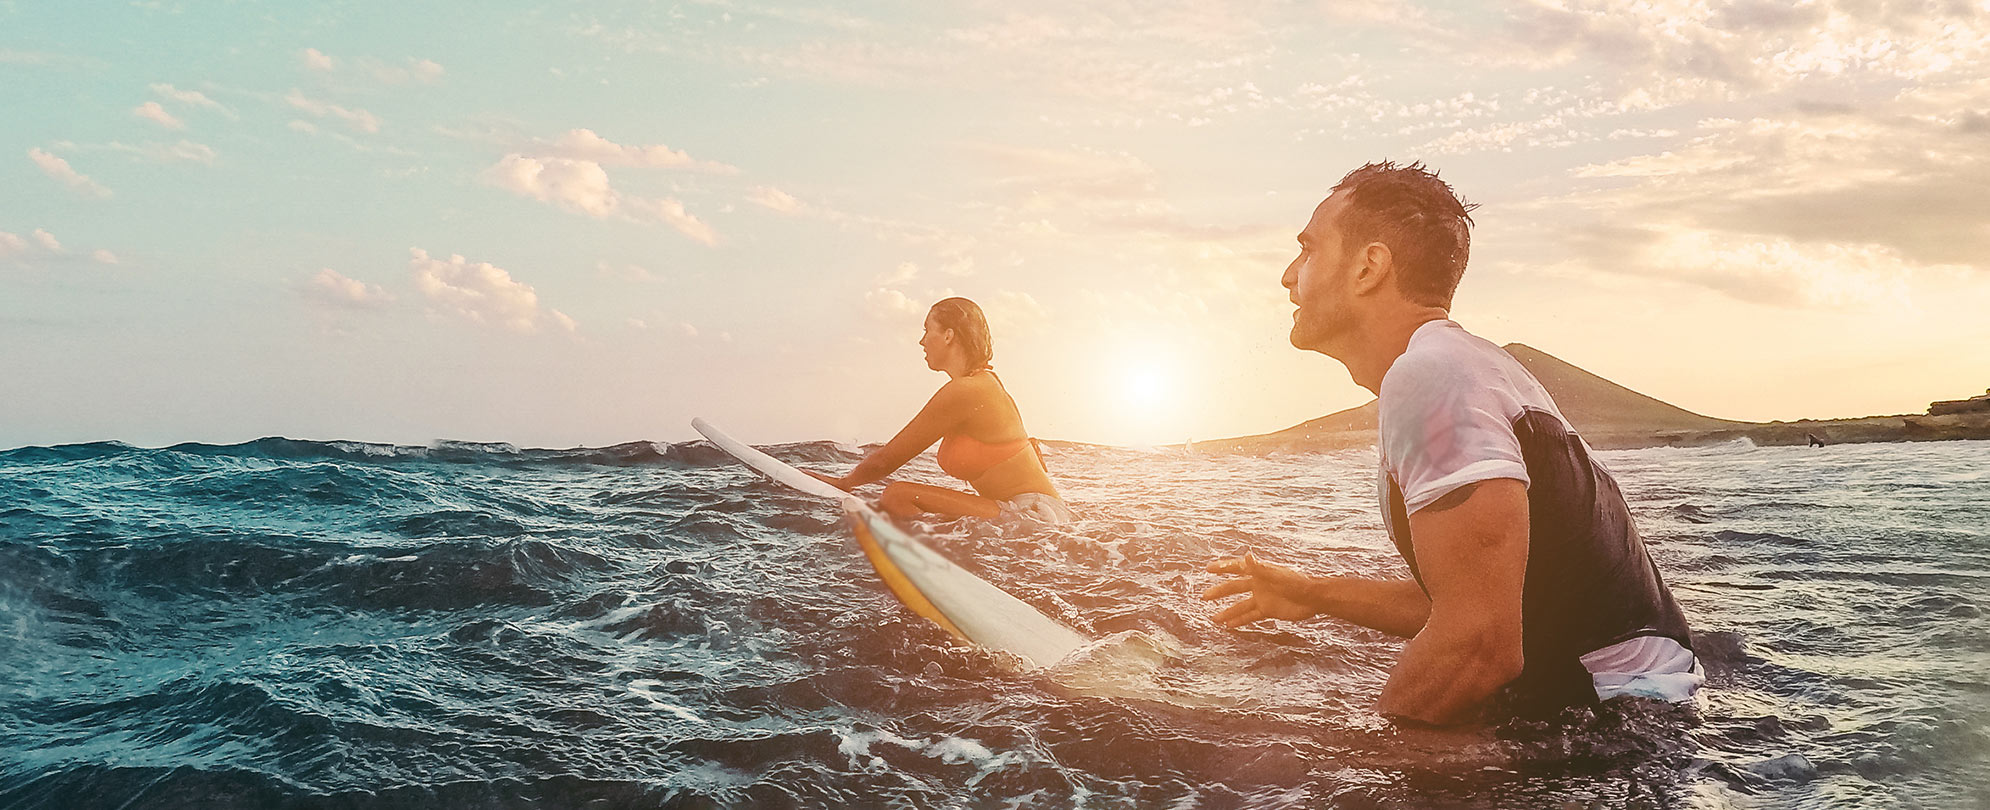 A man and woman out in the ocean with their surfboards waiting for the next wave. 